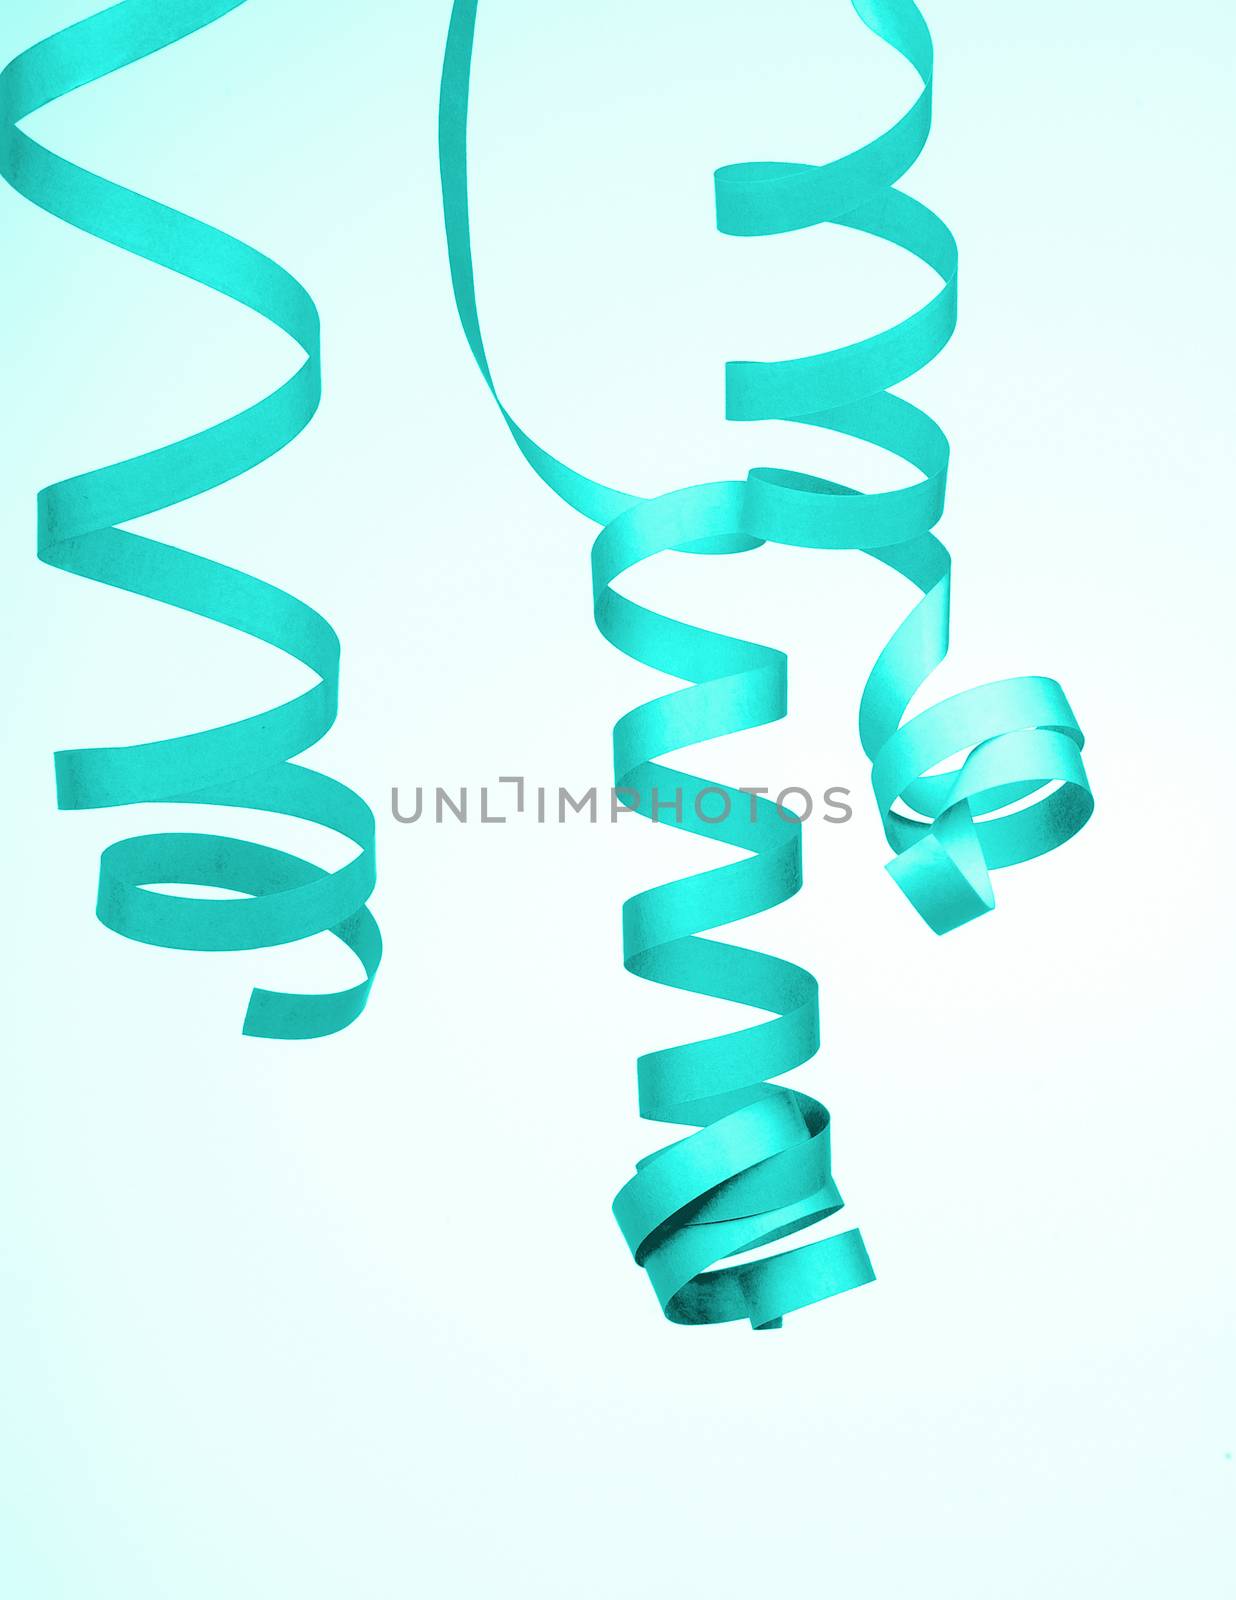 Three Turquoise Curled Party Streamers isolated on Blue-White background